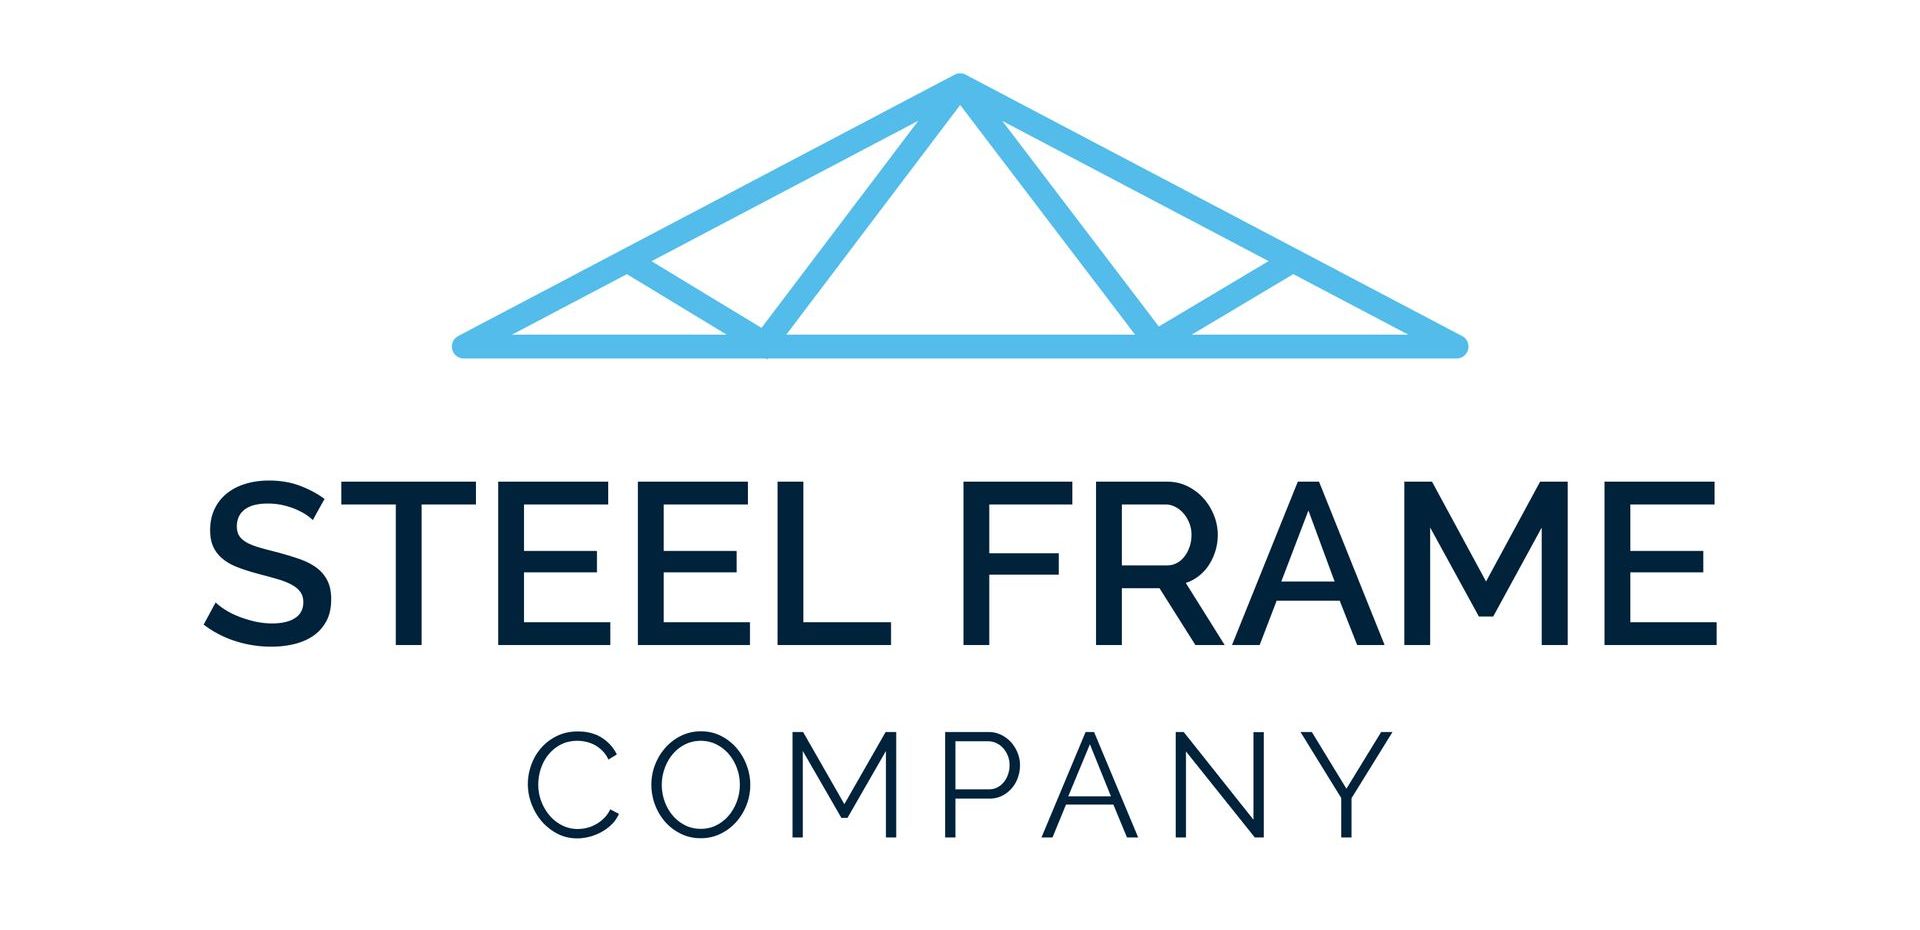 Steel Frame Company Provides Steel Frames Throughout Mudgee NSW